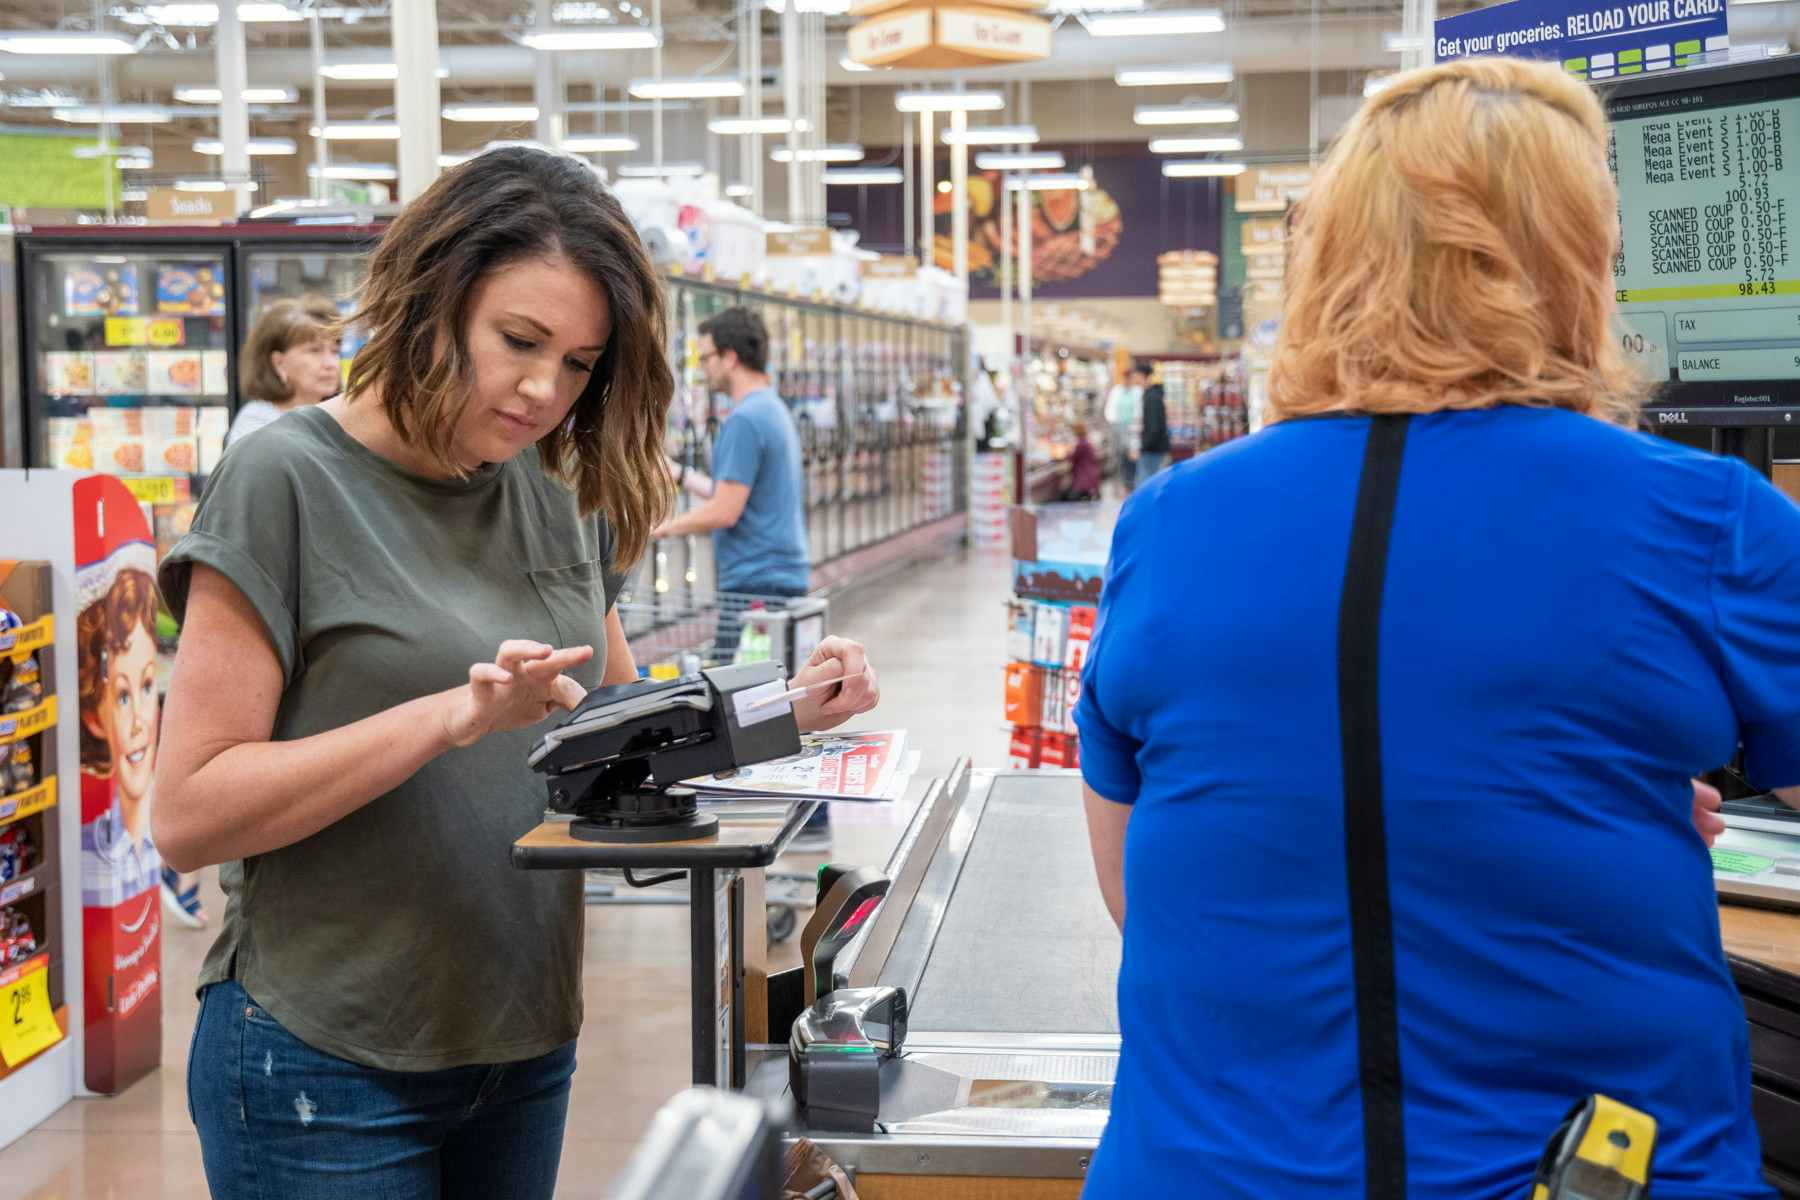 A woman typing in her phone number Alternate ID in a Kroger checkout lane.